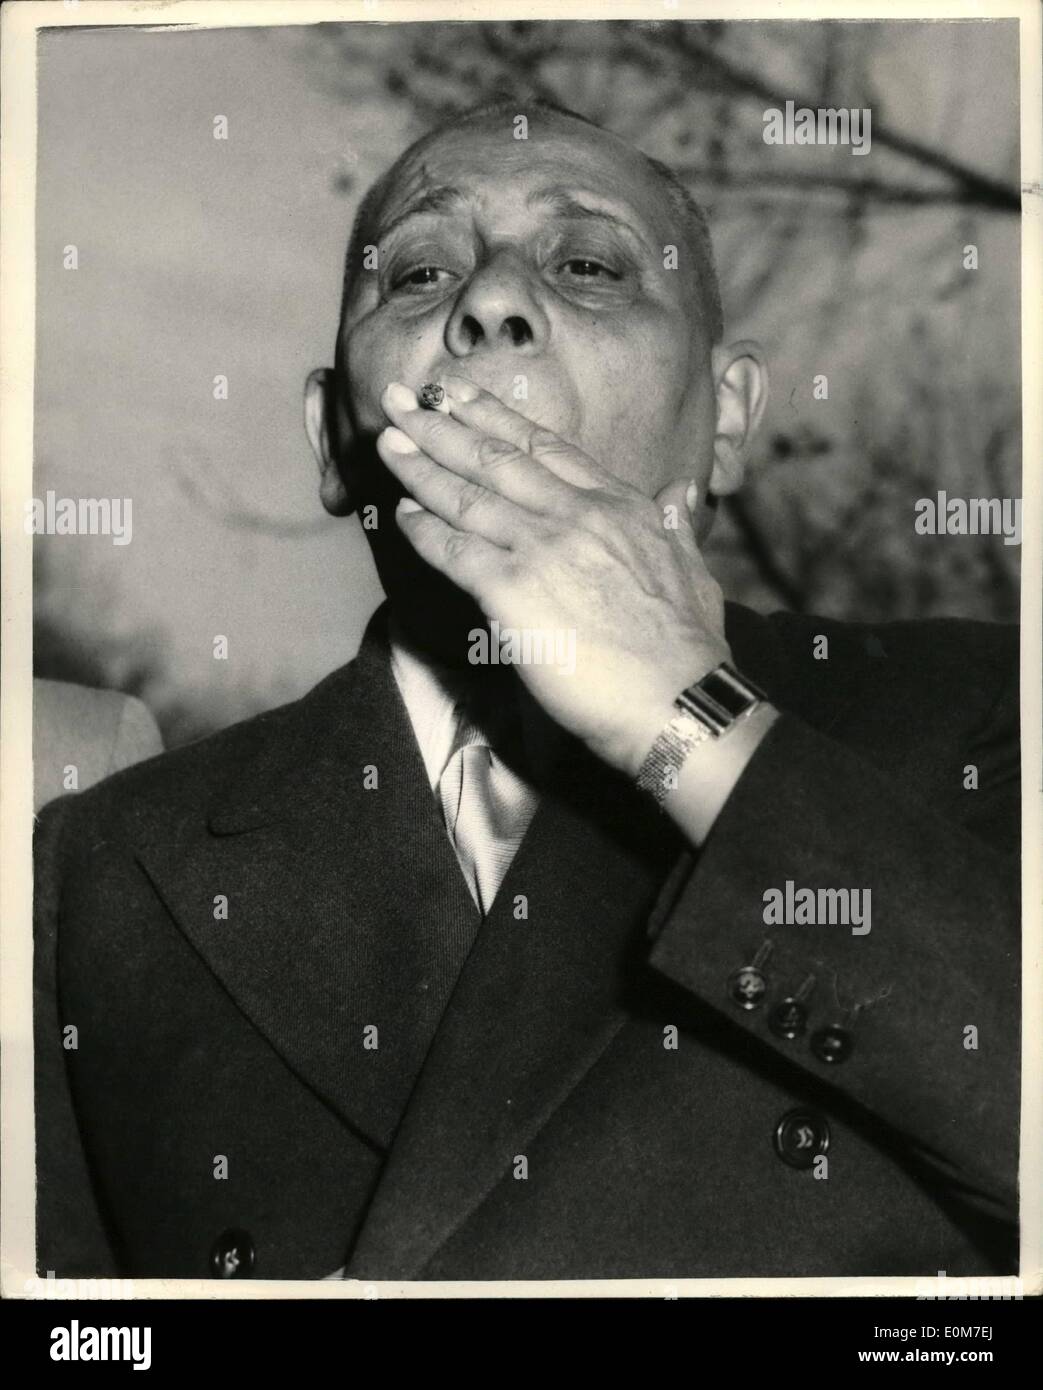 Jan. 01, 1954 - Erich Von Stroheim Holds A Press Conference Make-Shift Monocle: Erich Von Stroheim the monocled, bullying Prussian of pre-war films - who arrived in London this morning - held a press conference at the Savoy Hotel this afternoon. Photo shows Erich Von Stroheim takes a pull at his cigarette - during the conference this afternoon. Stock Photo